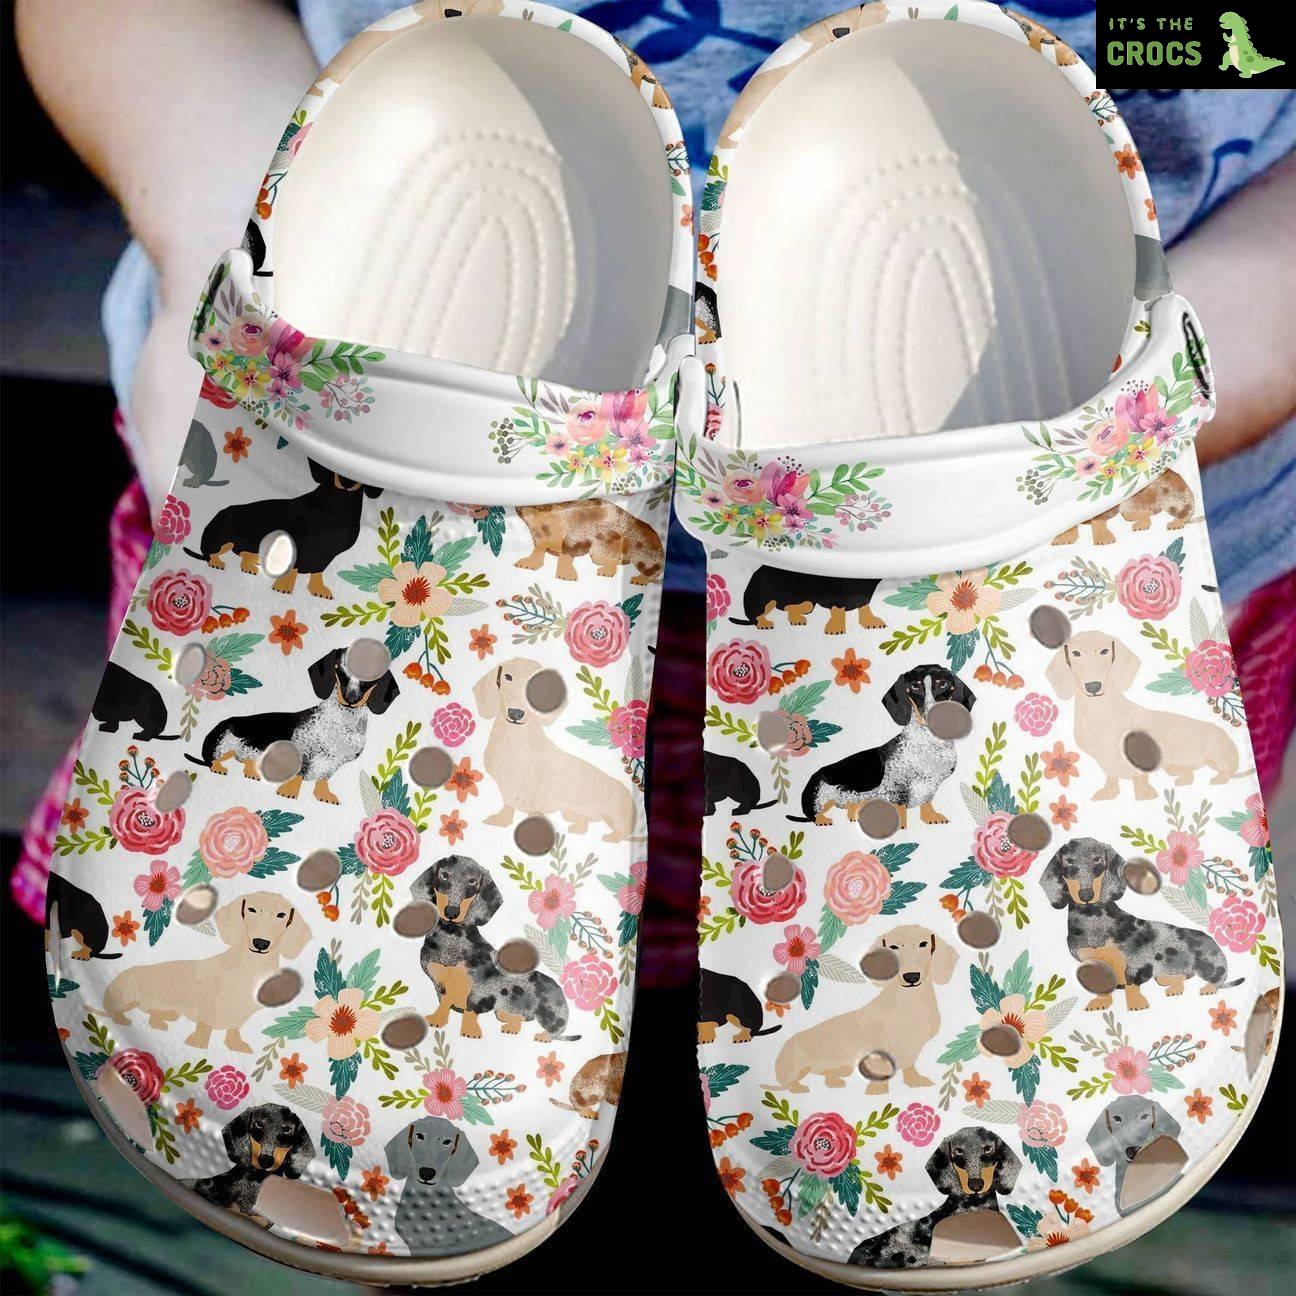 Dachshund Personalized Clog Custom Crocs Comfortablefashion Style Comfortable For Women Men Kid Print 3D Dachshunds And Flowers